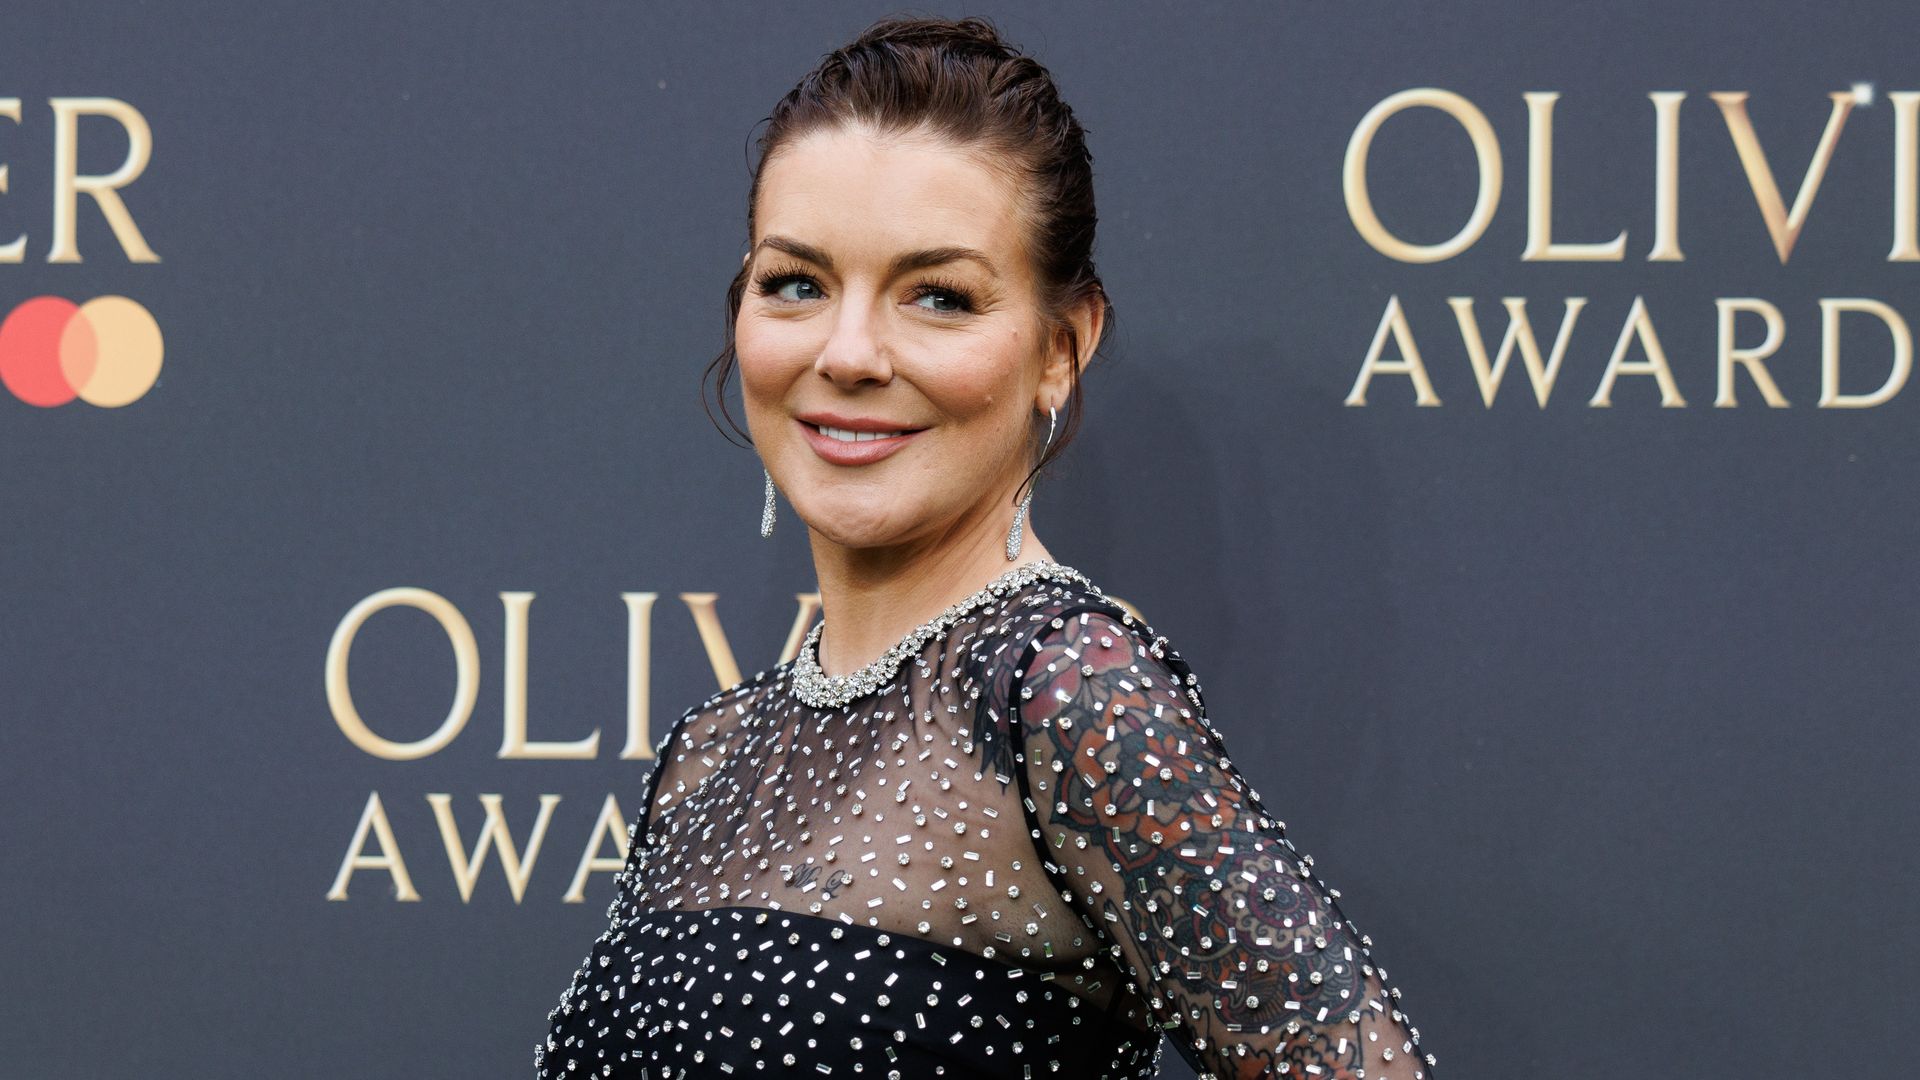 Sheridan Smith to star in new ITV drama based on harrowing real-life murder